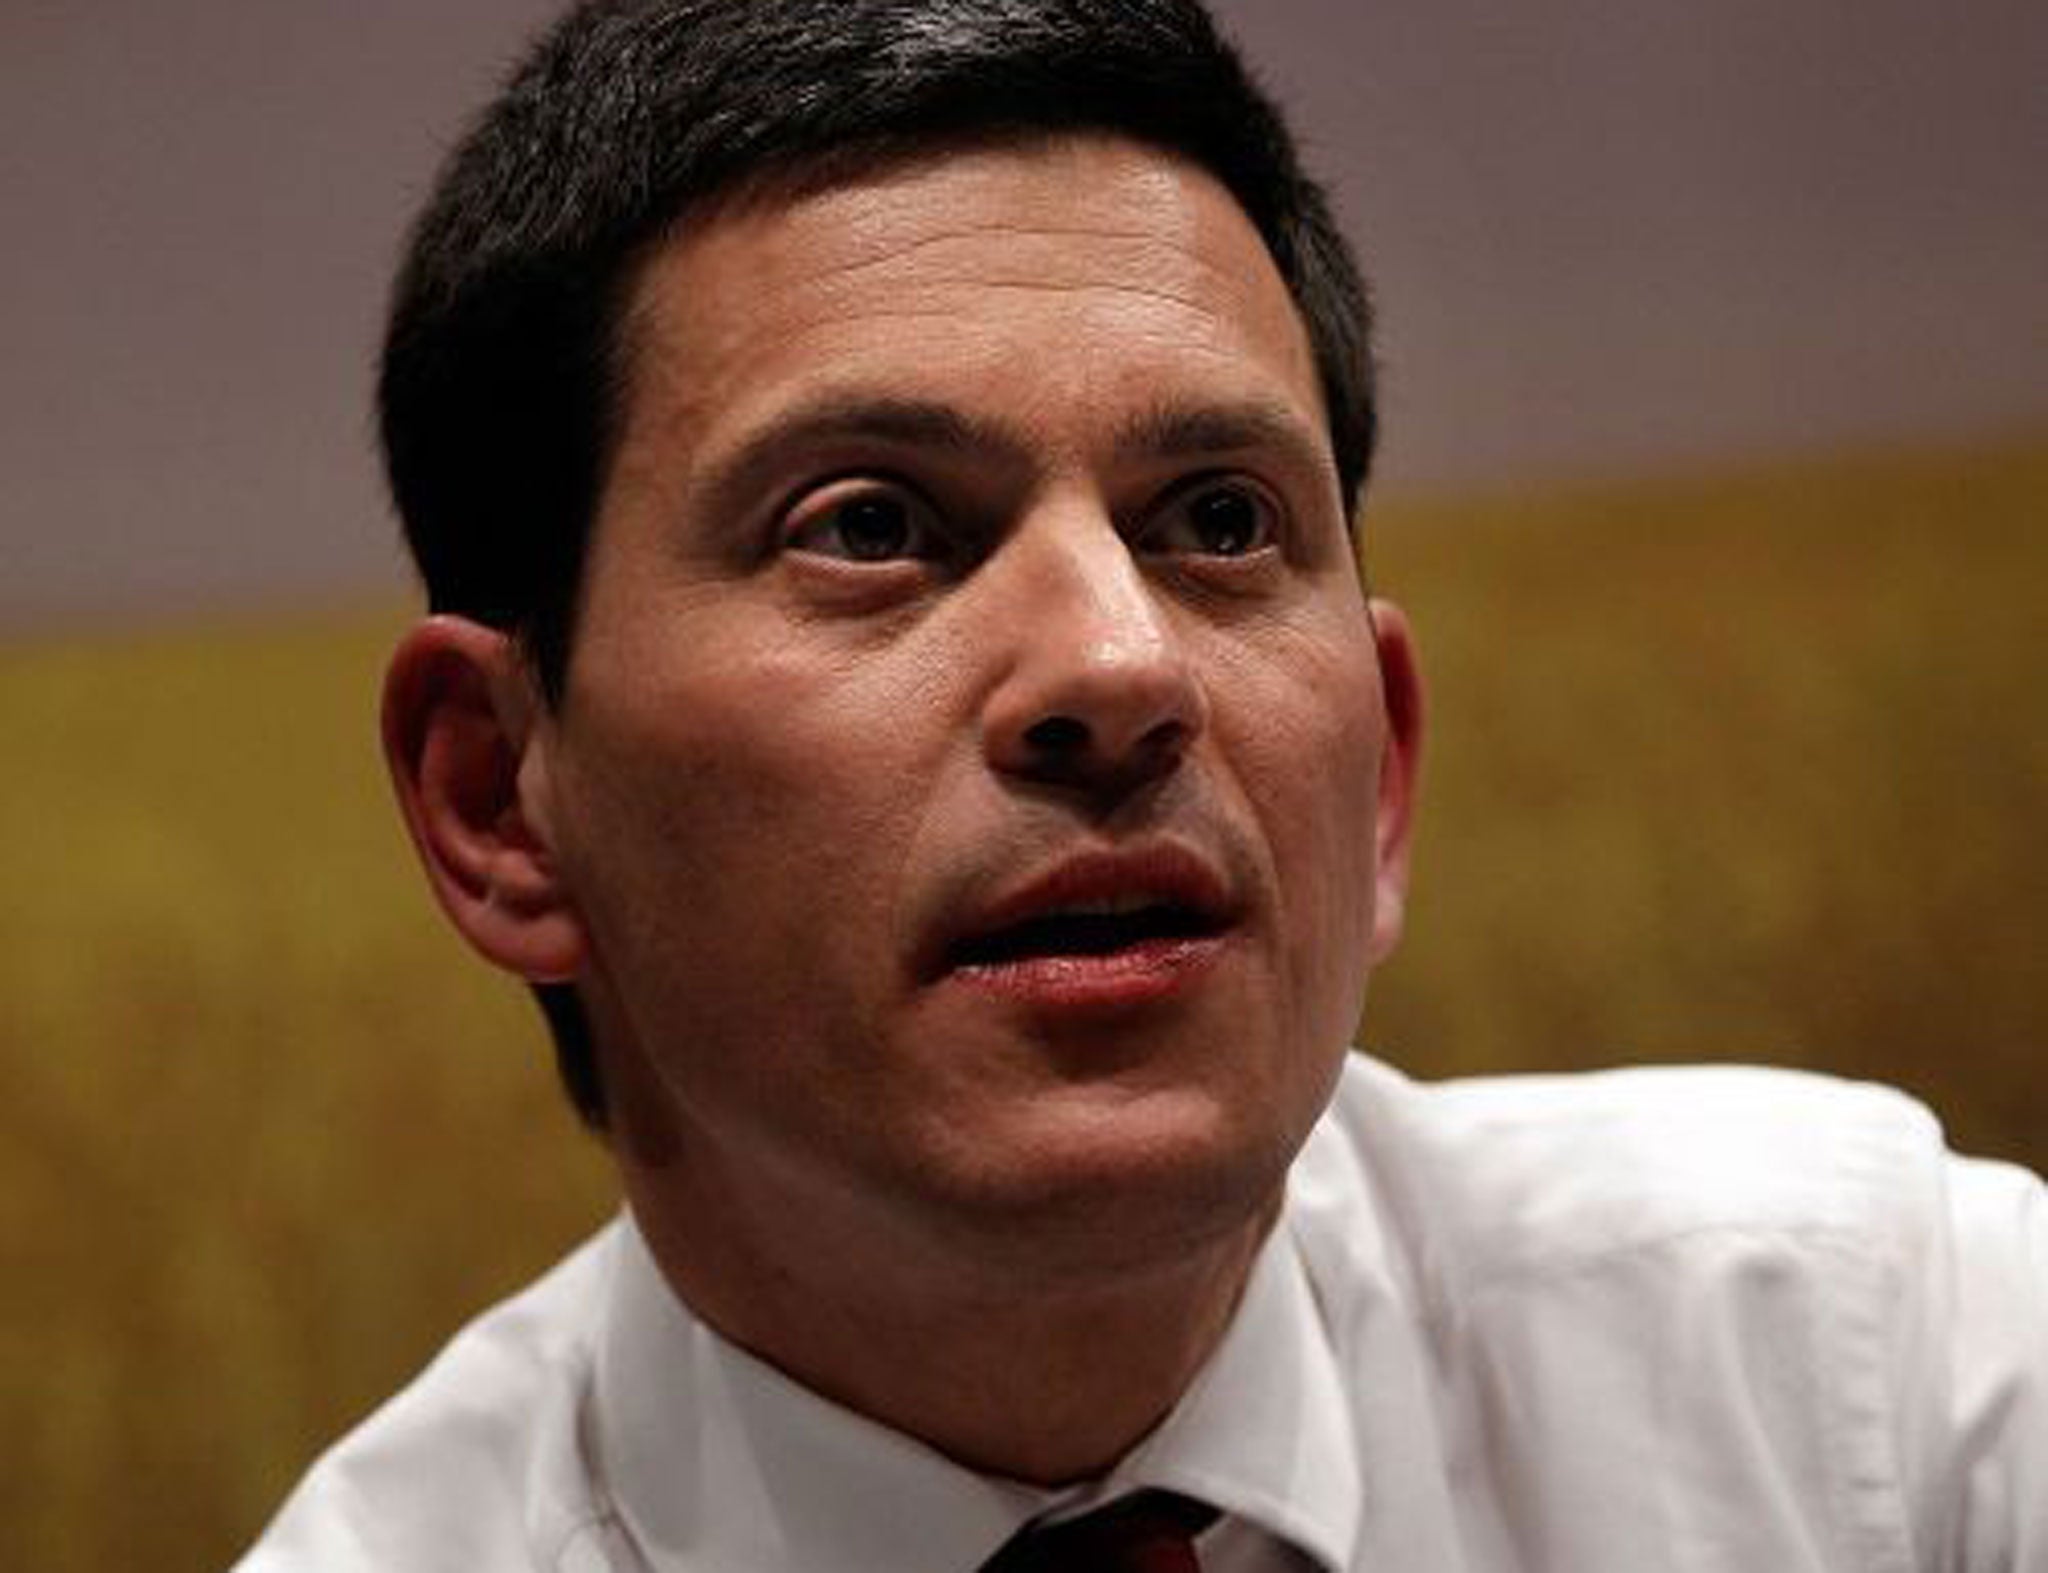 Labour MP David Miliband is to step down